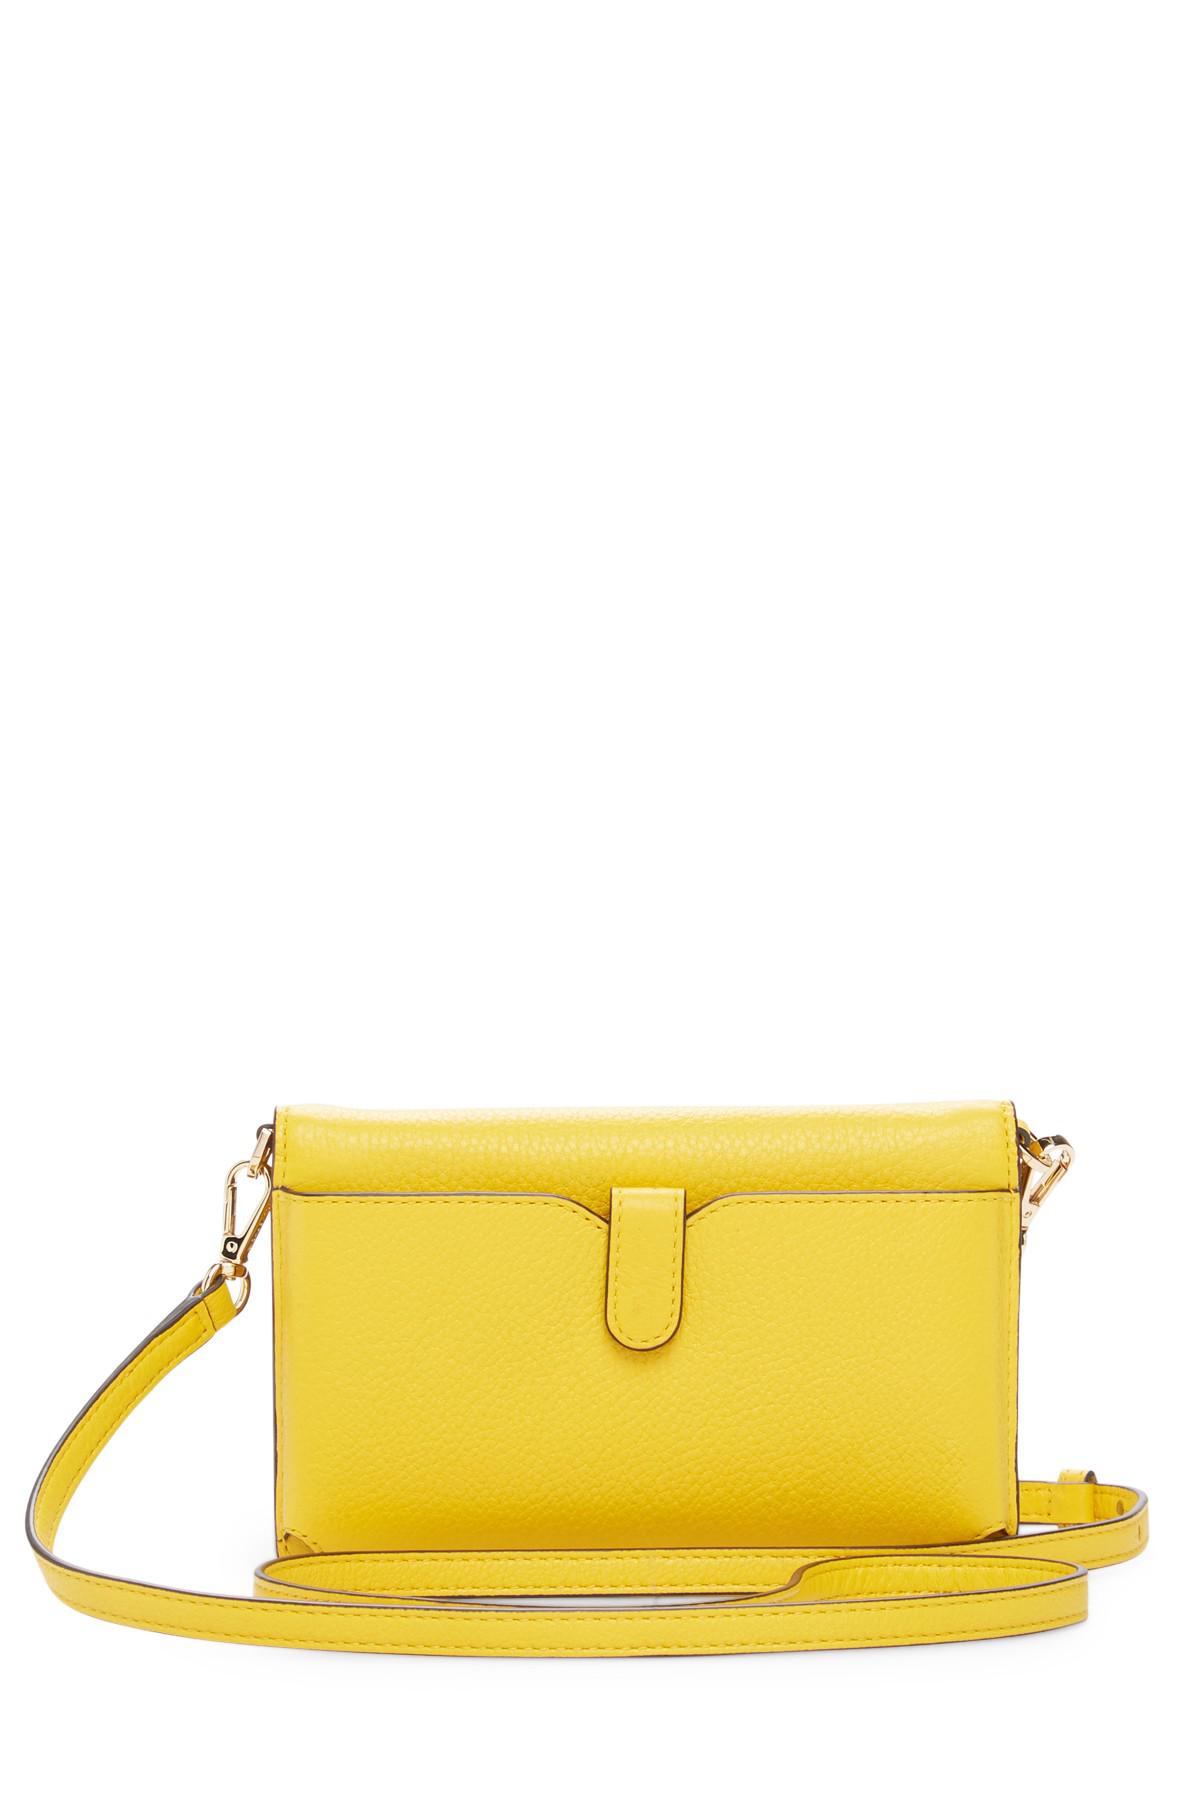 MICHAEL Michael Kors Floral Embellished Leather Phone Crossbody Bag in Yellow - Lyst